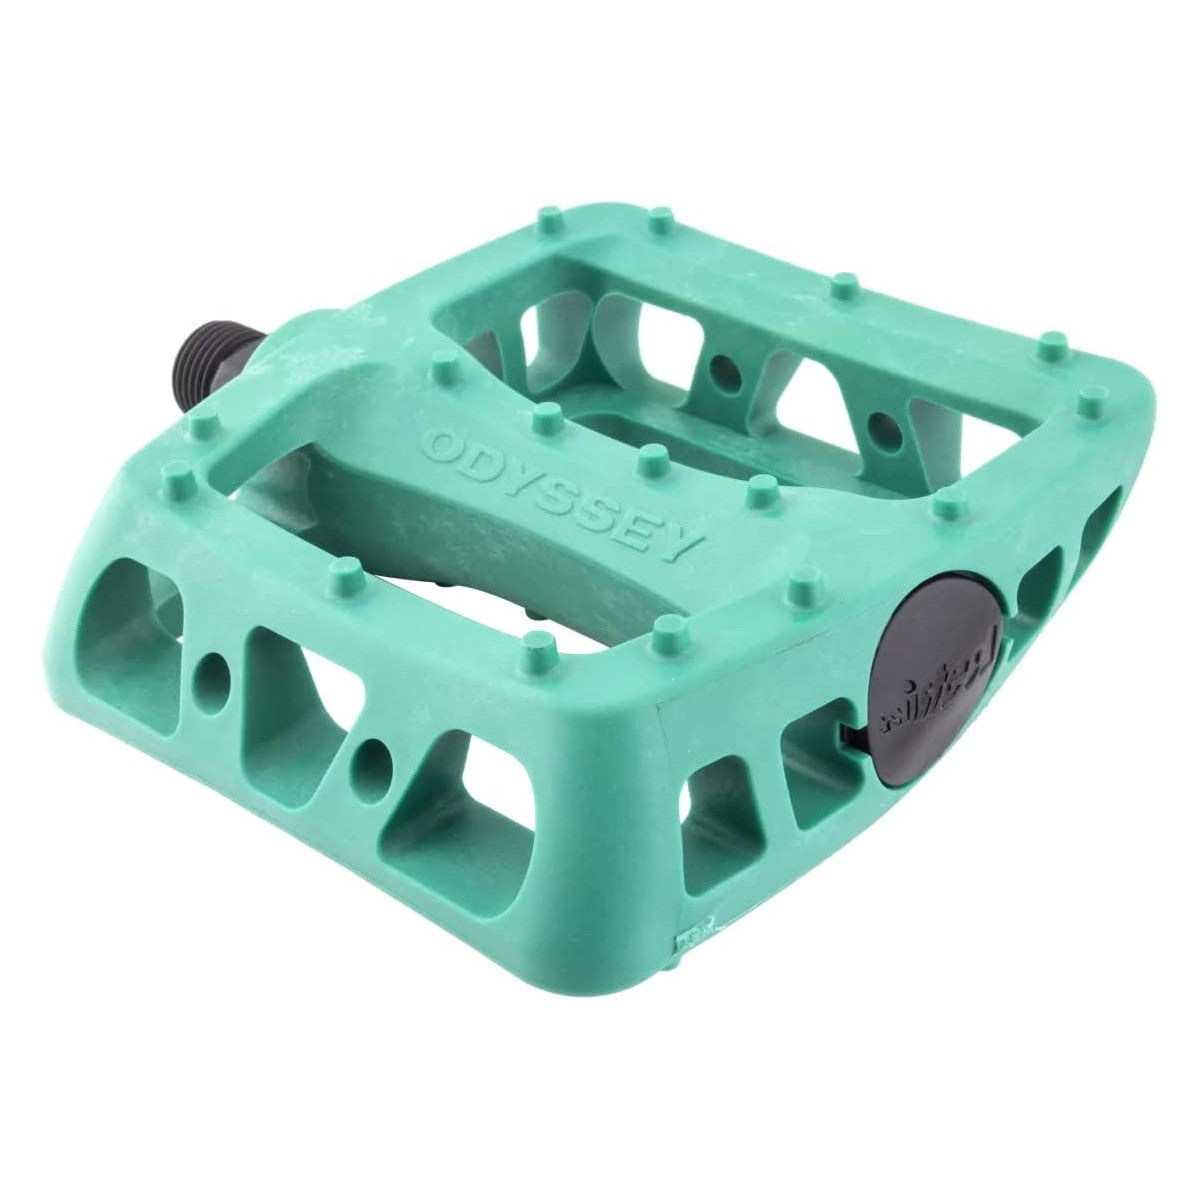 Odyssey Twisted Pedals - Lenny's Bike Shop